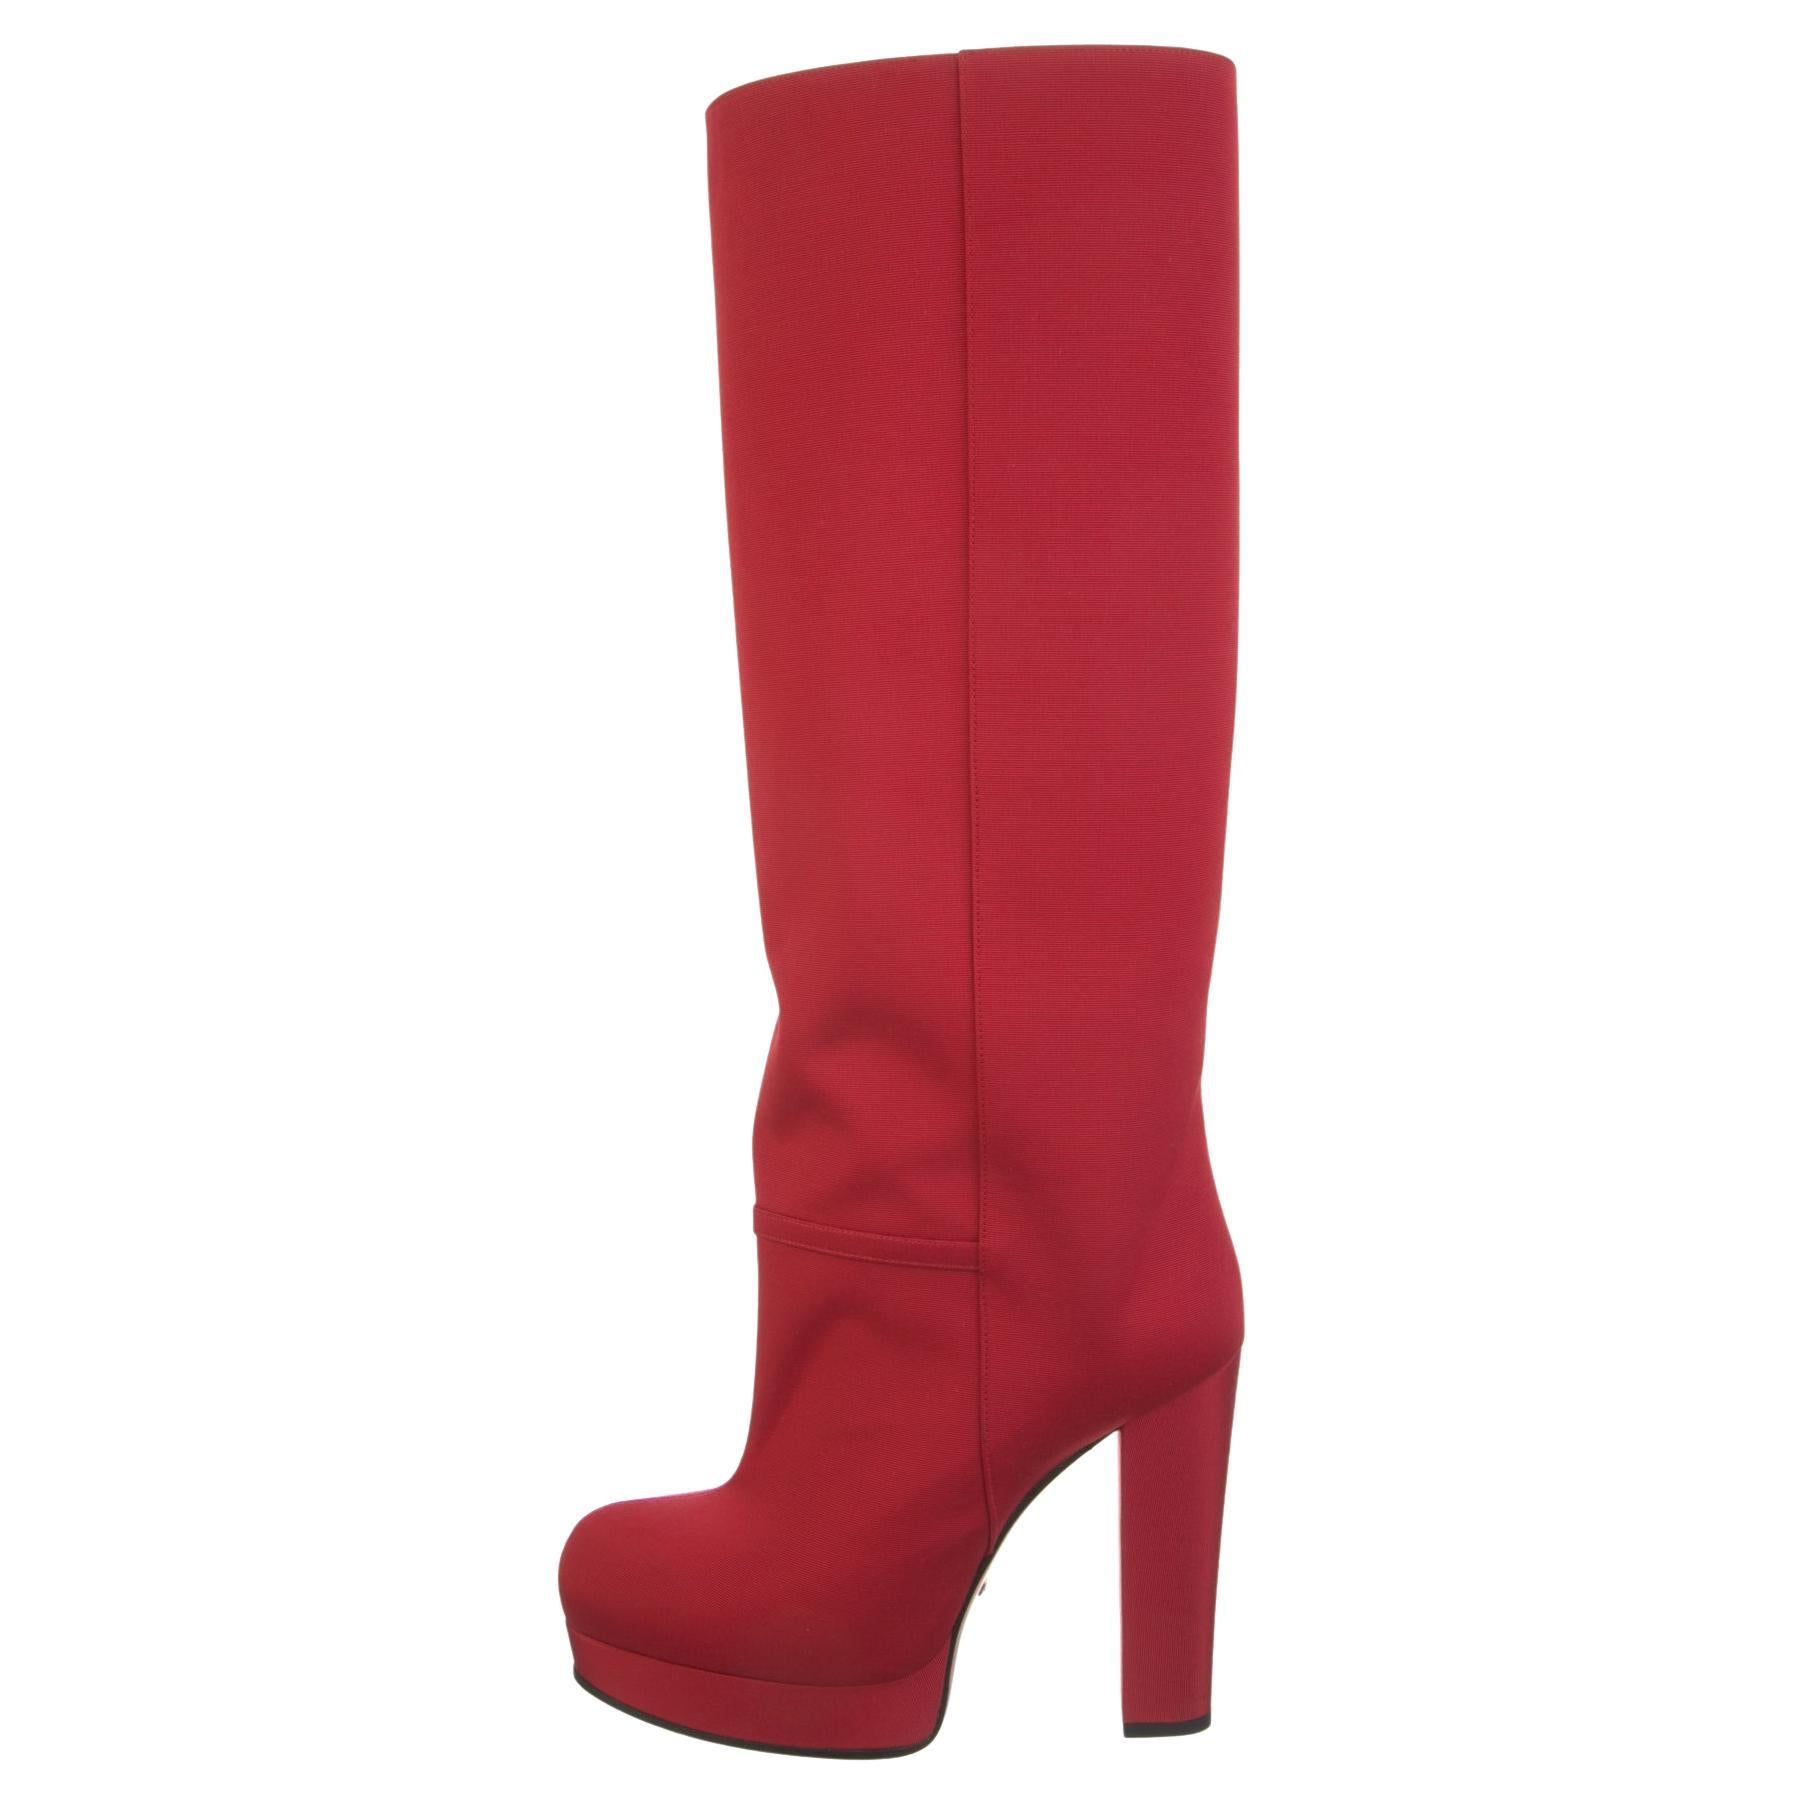 New With Box Gucci Fall 2019 Alessandro Michele Red Boots Sz 36.5 In New Condition For Sale In Leesburg, VA